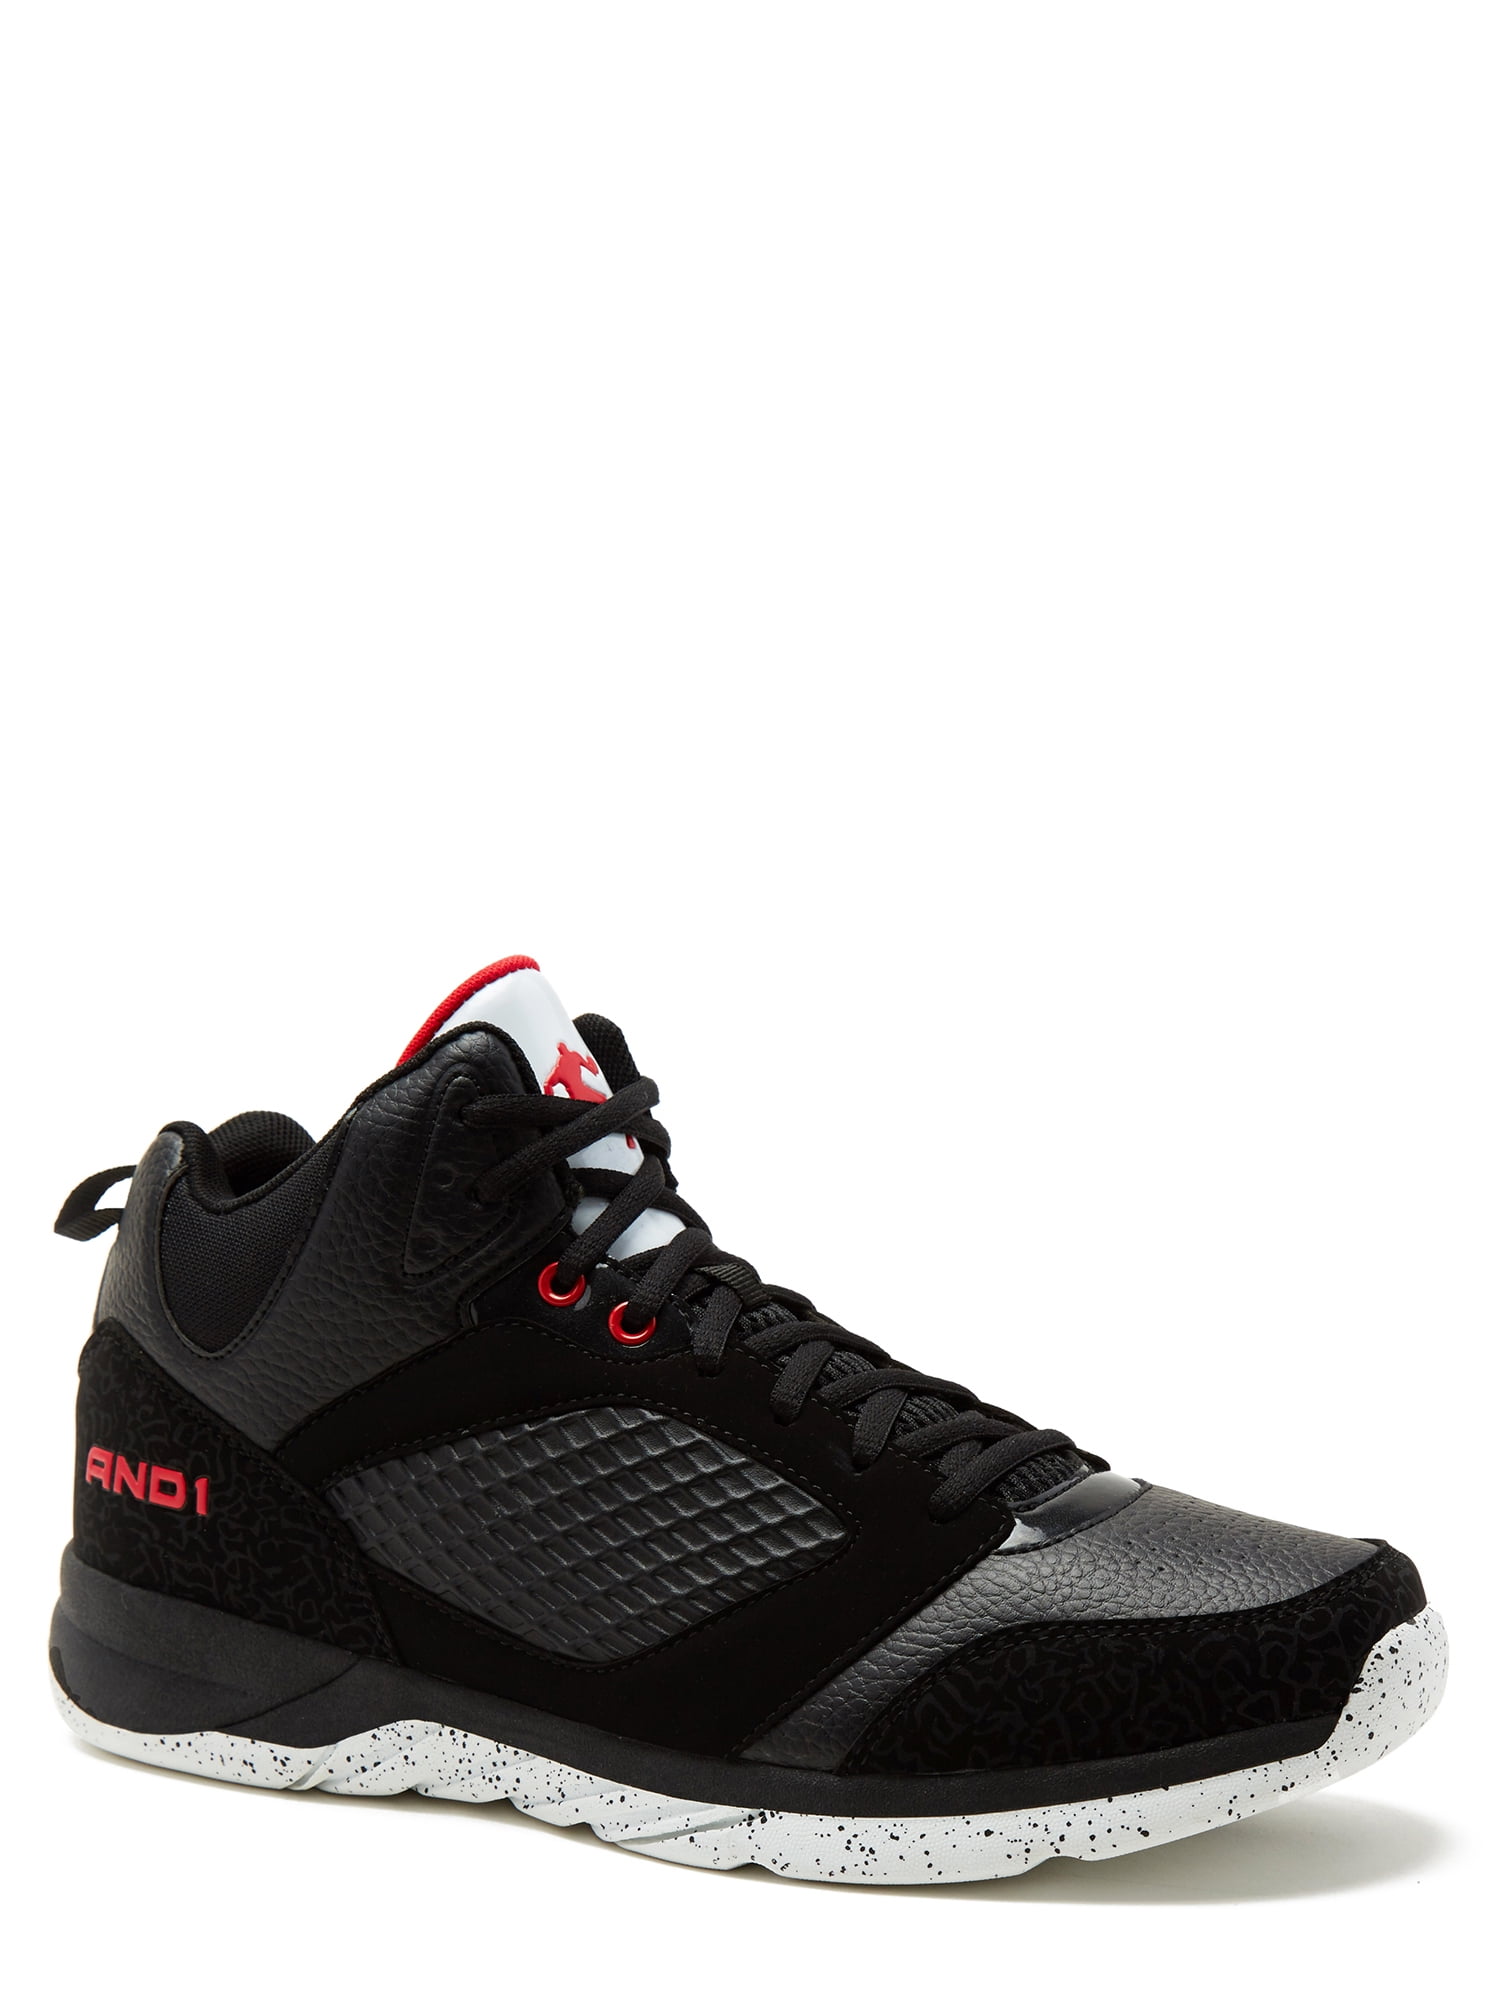 AND1 Men's Capital 2.0 Athletic Shoe 